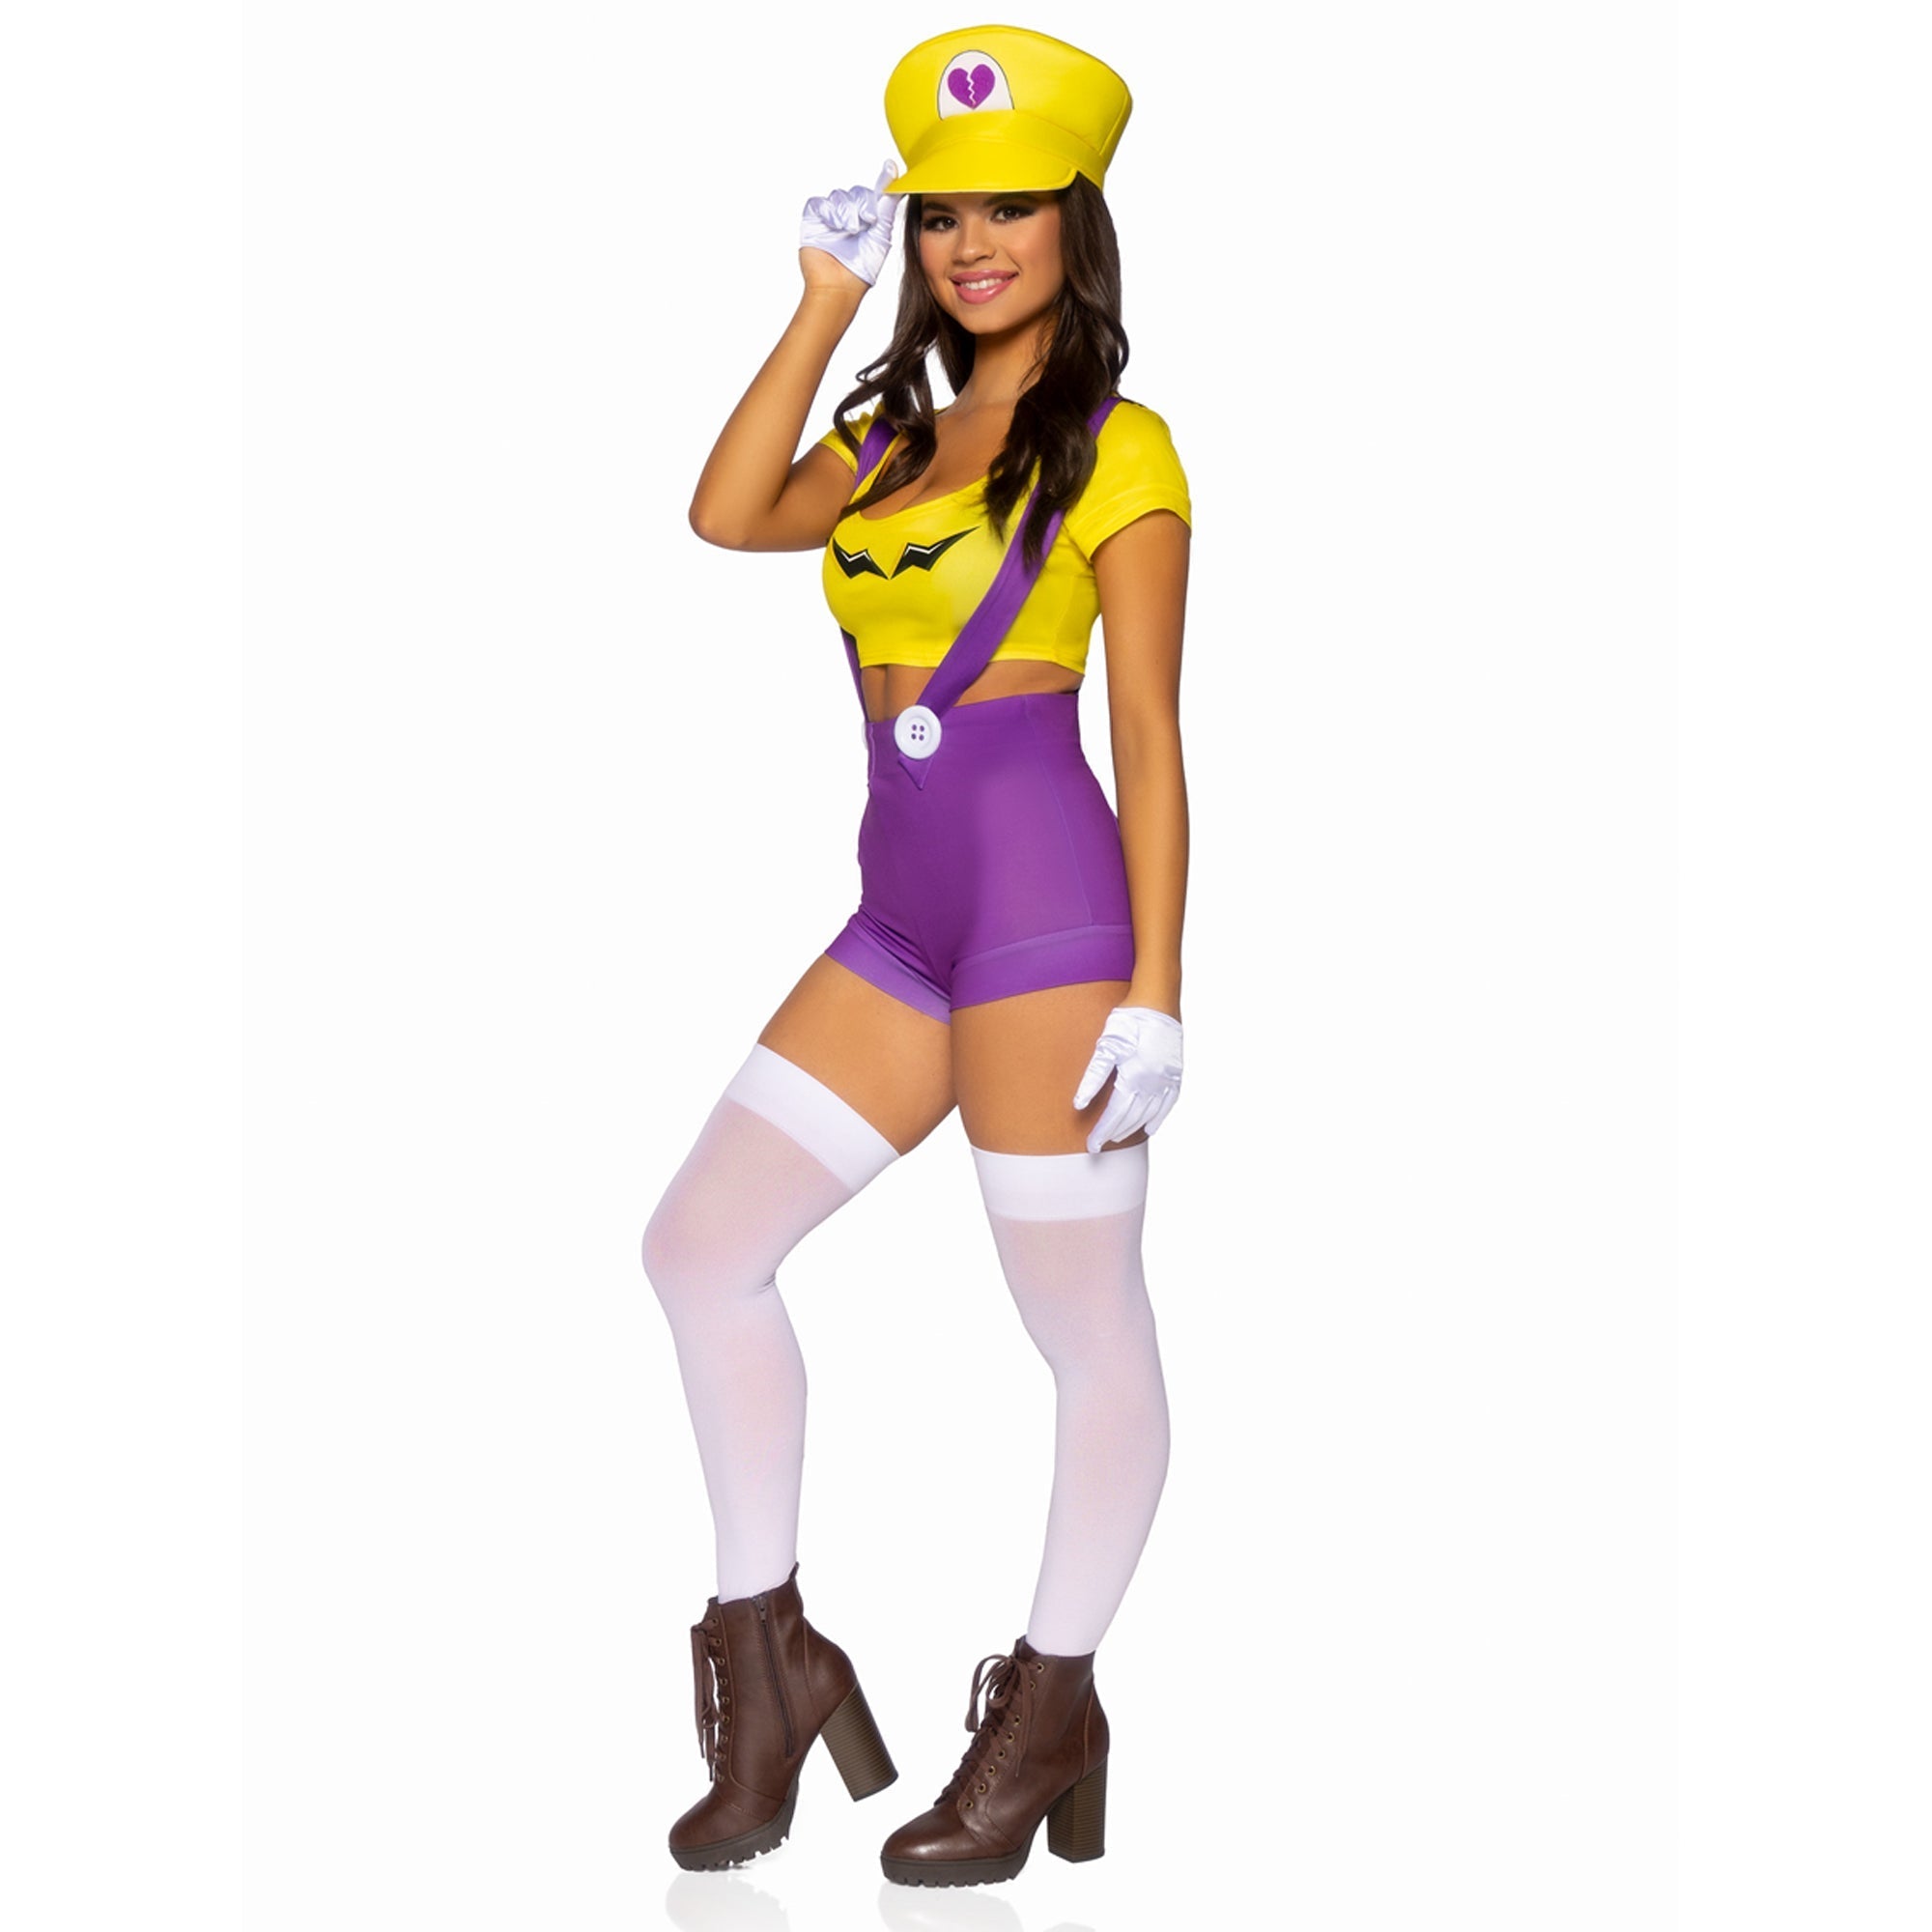 Gamer Villain Sexy Costume for Adults, Yellow Crop Top and Purple Short